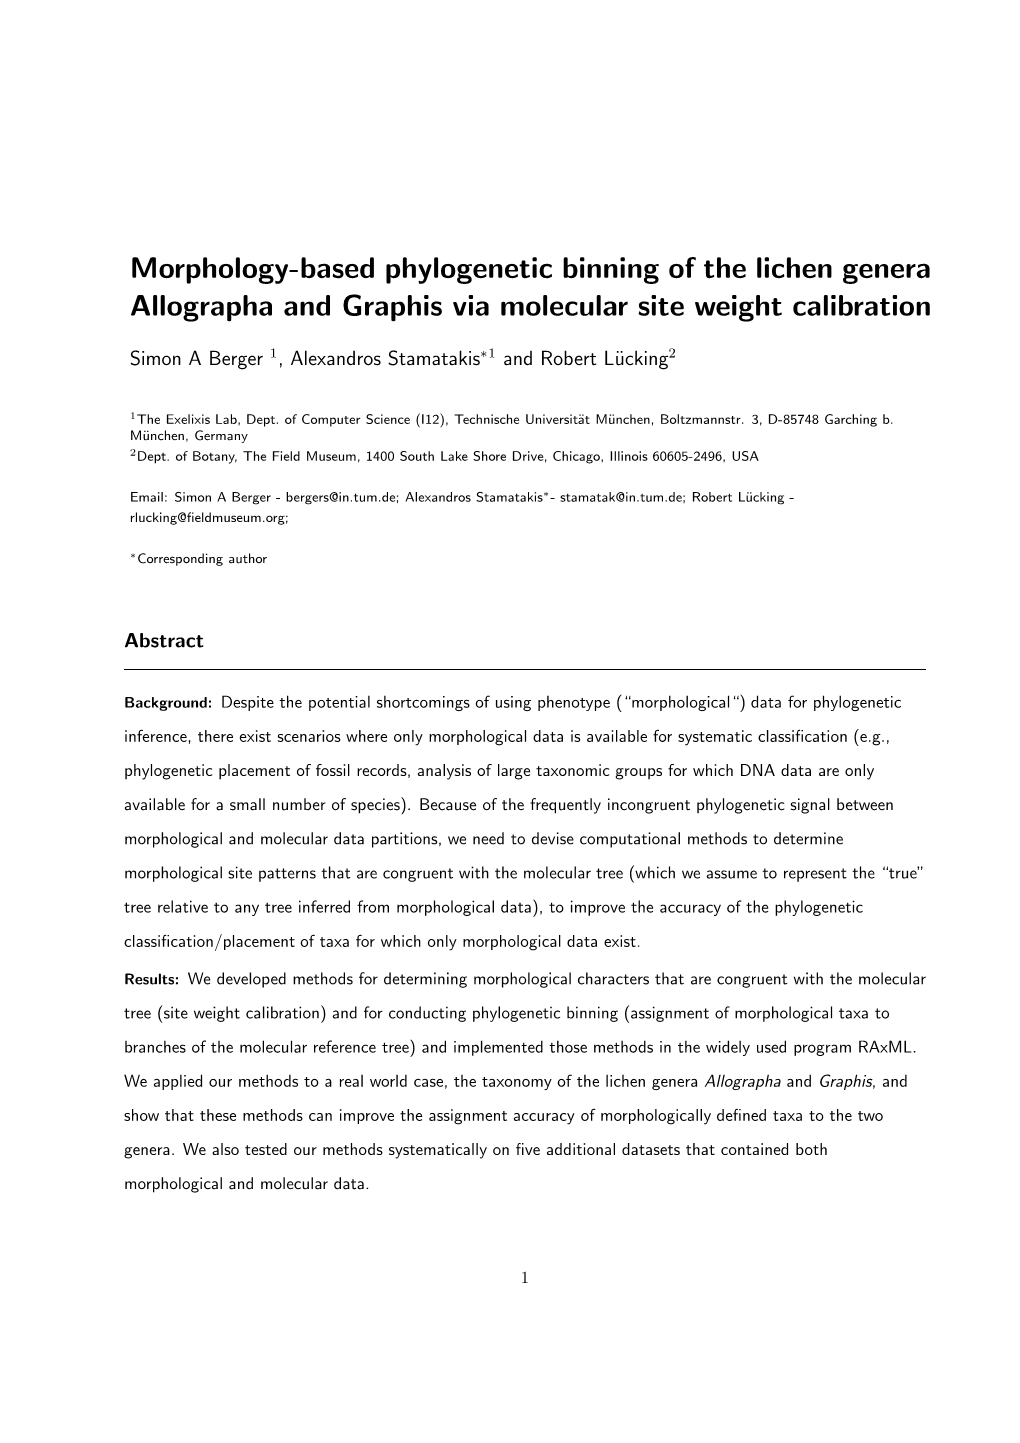 Morphology-Based Phylogenetic Binning of the Lichen Genera Allographa and Graphis Via Molecular Site Weight Calibration